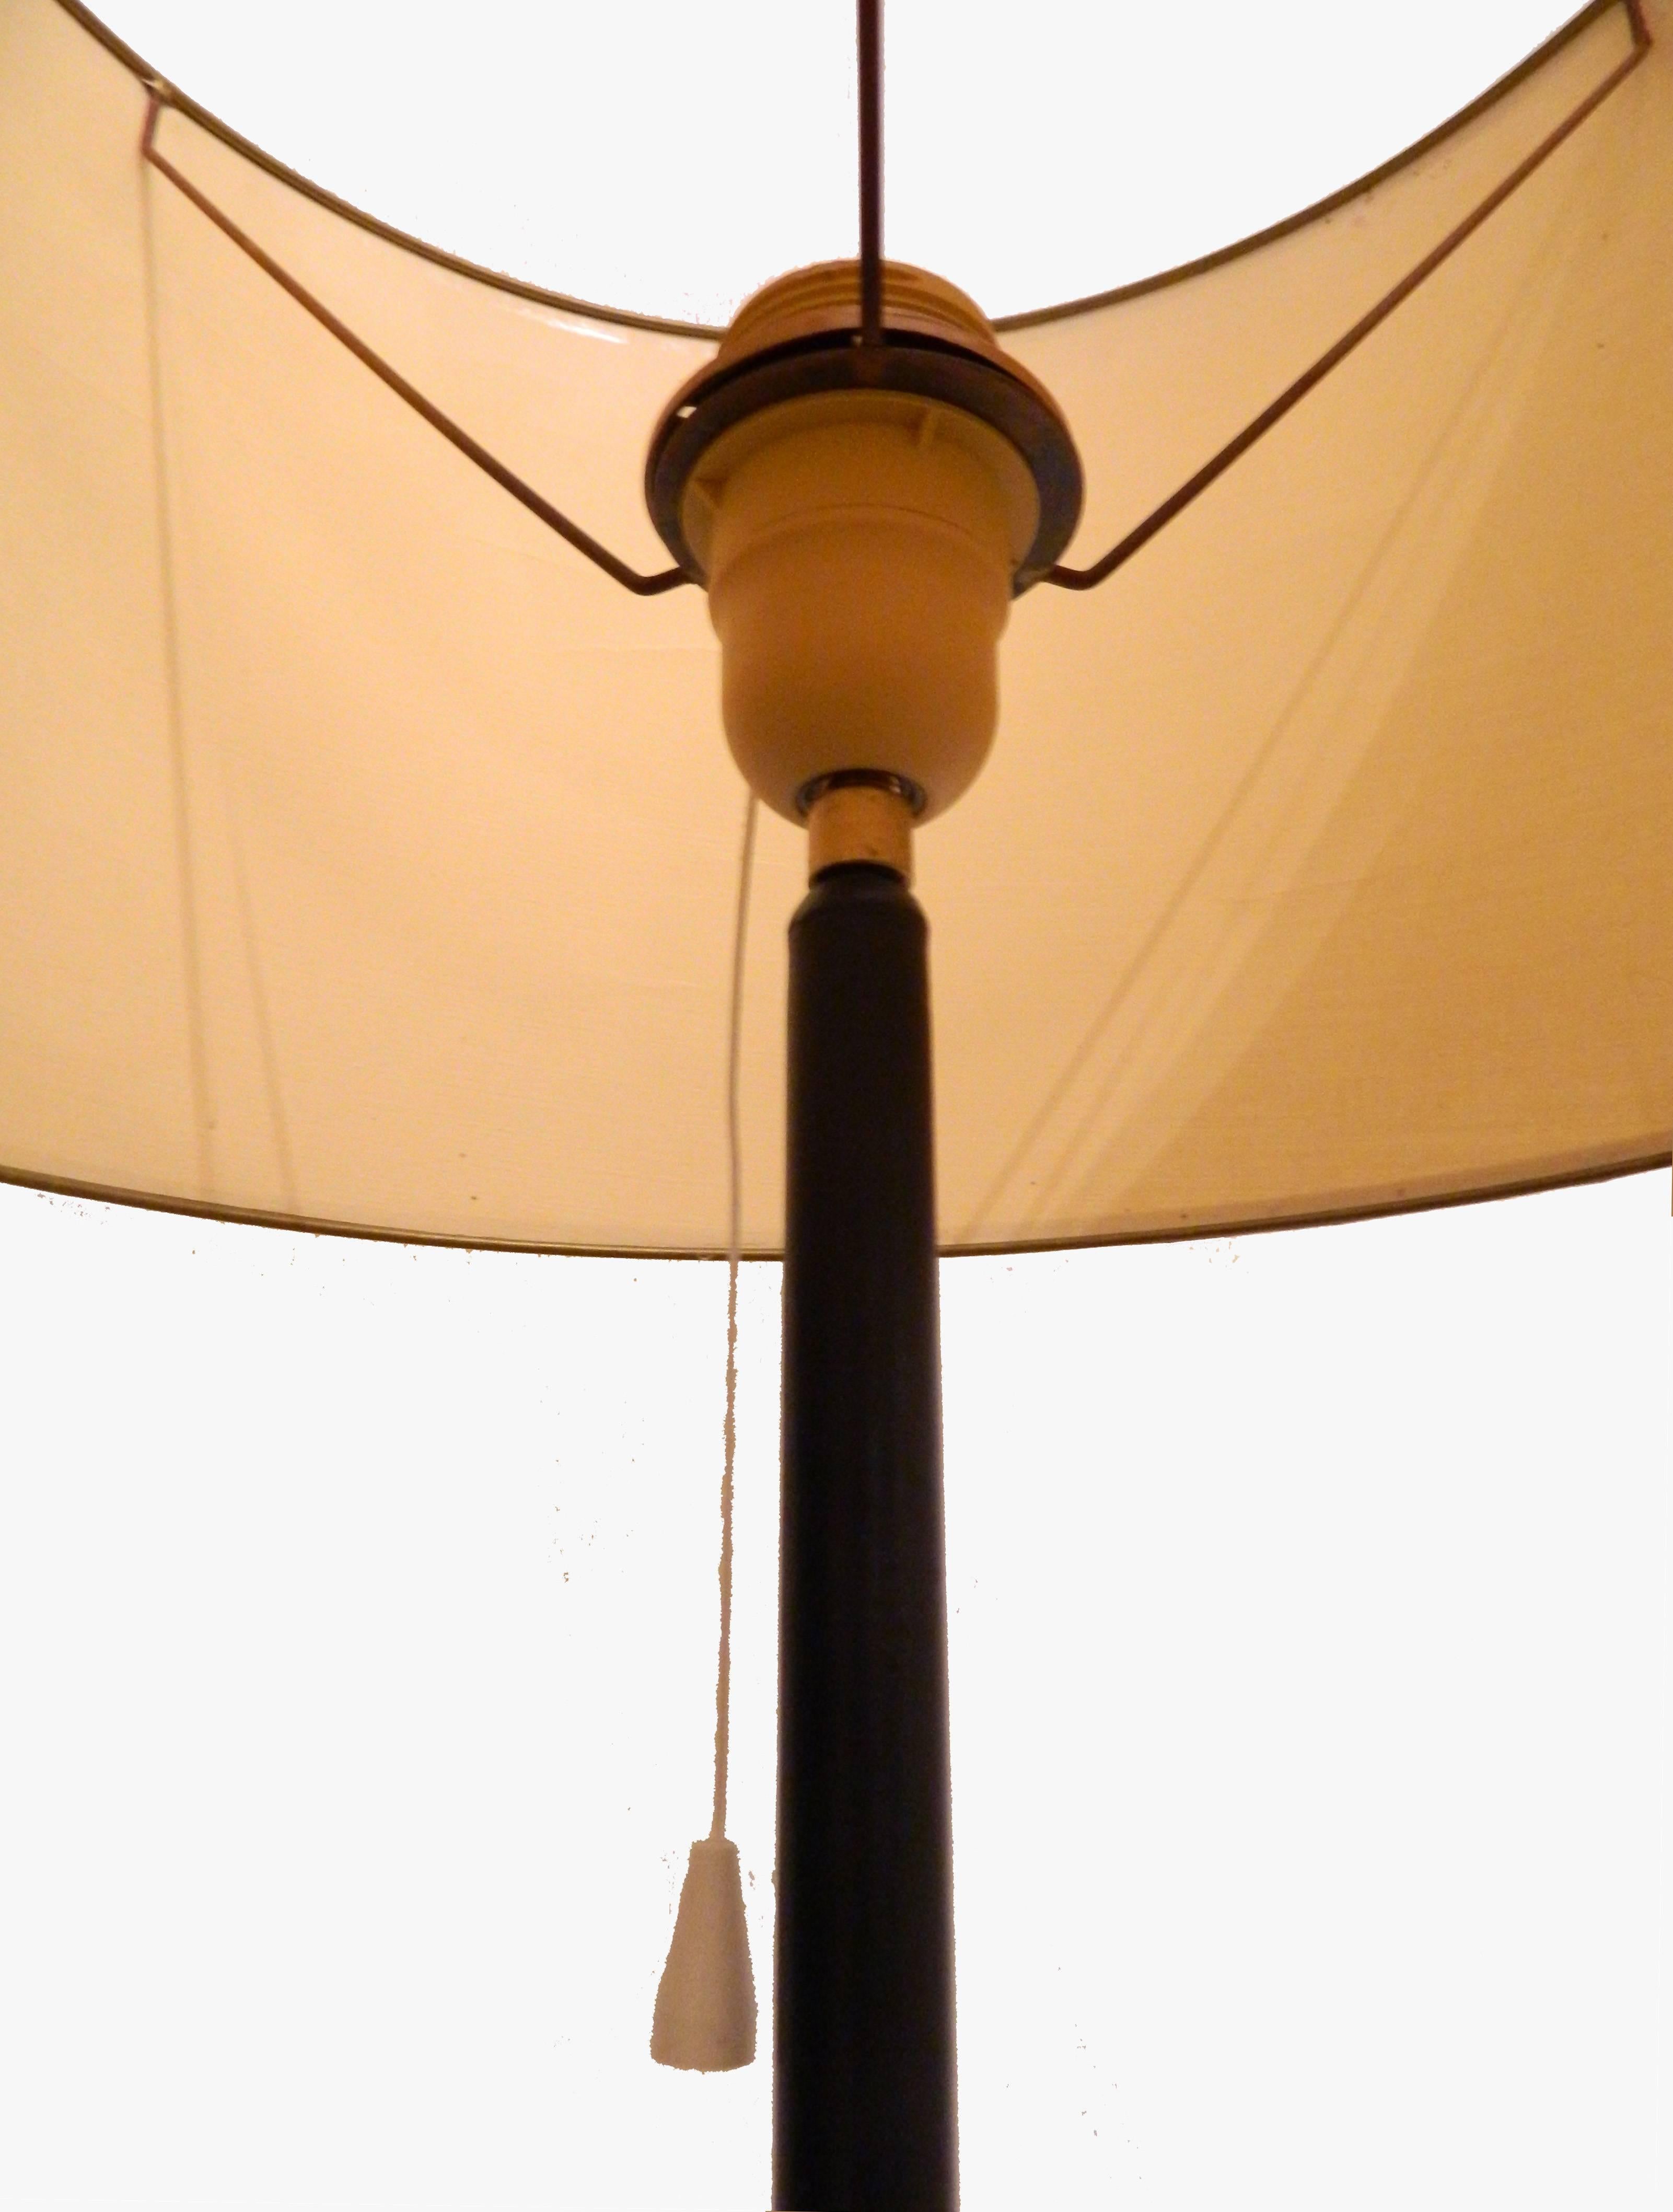 Nice Jacques Adnet style floor lamp in black iron and brass, original shade.
One light, 100-watt maximum.
US rewired and in working condition.